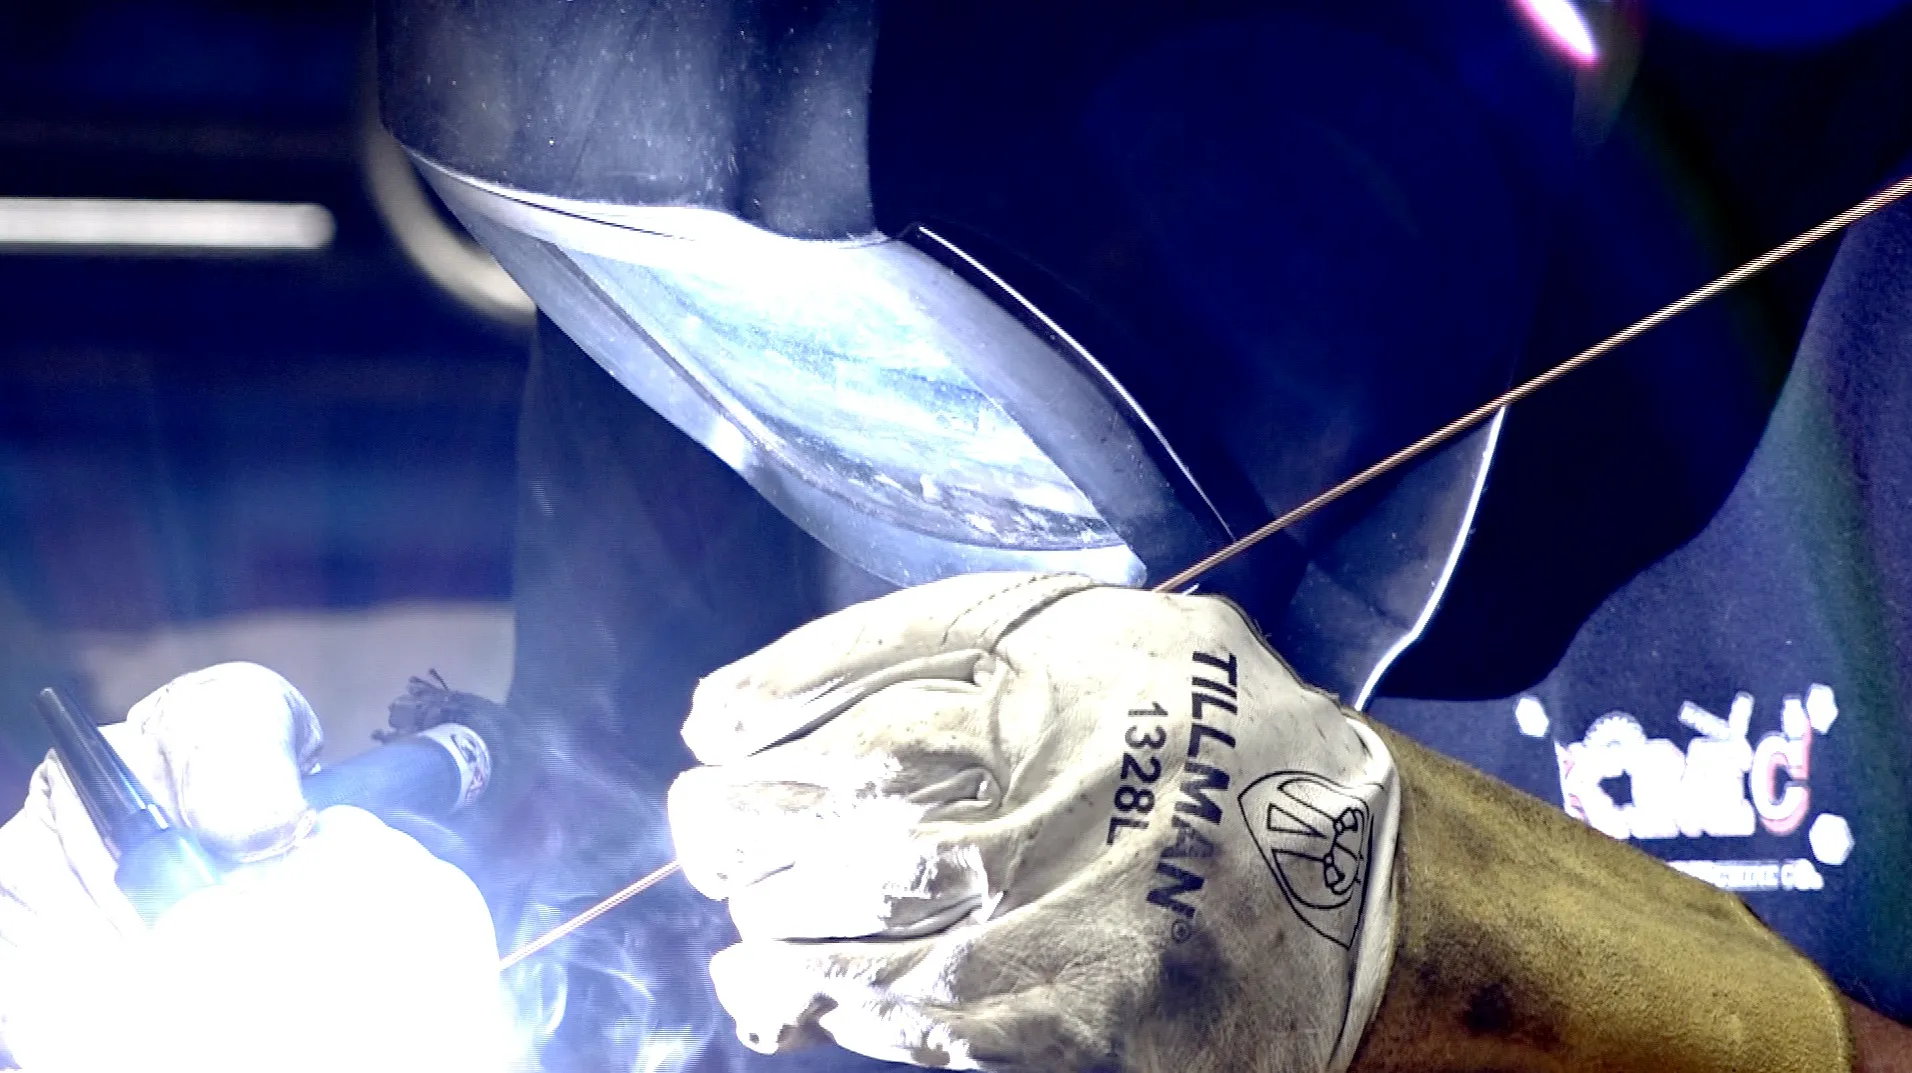 masked worker welding with blue flame